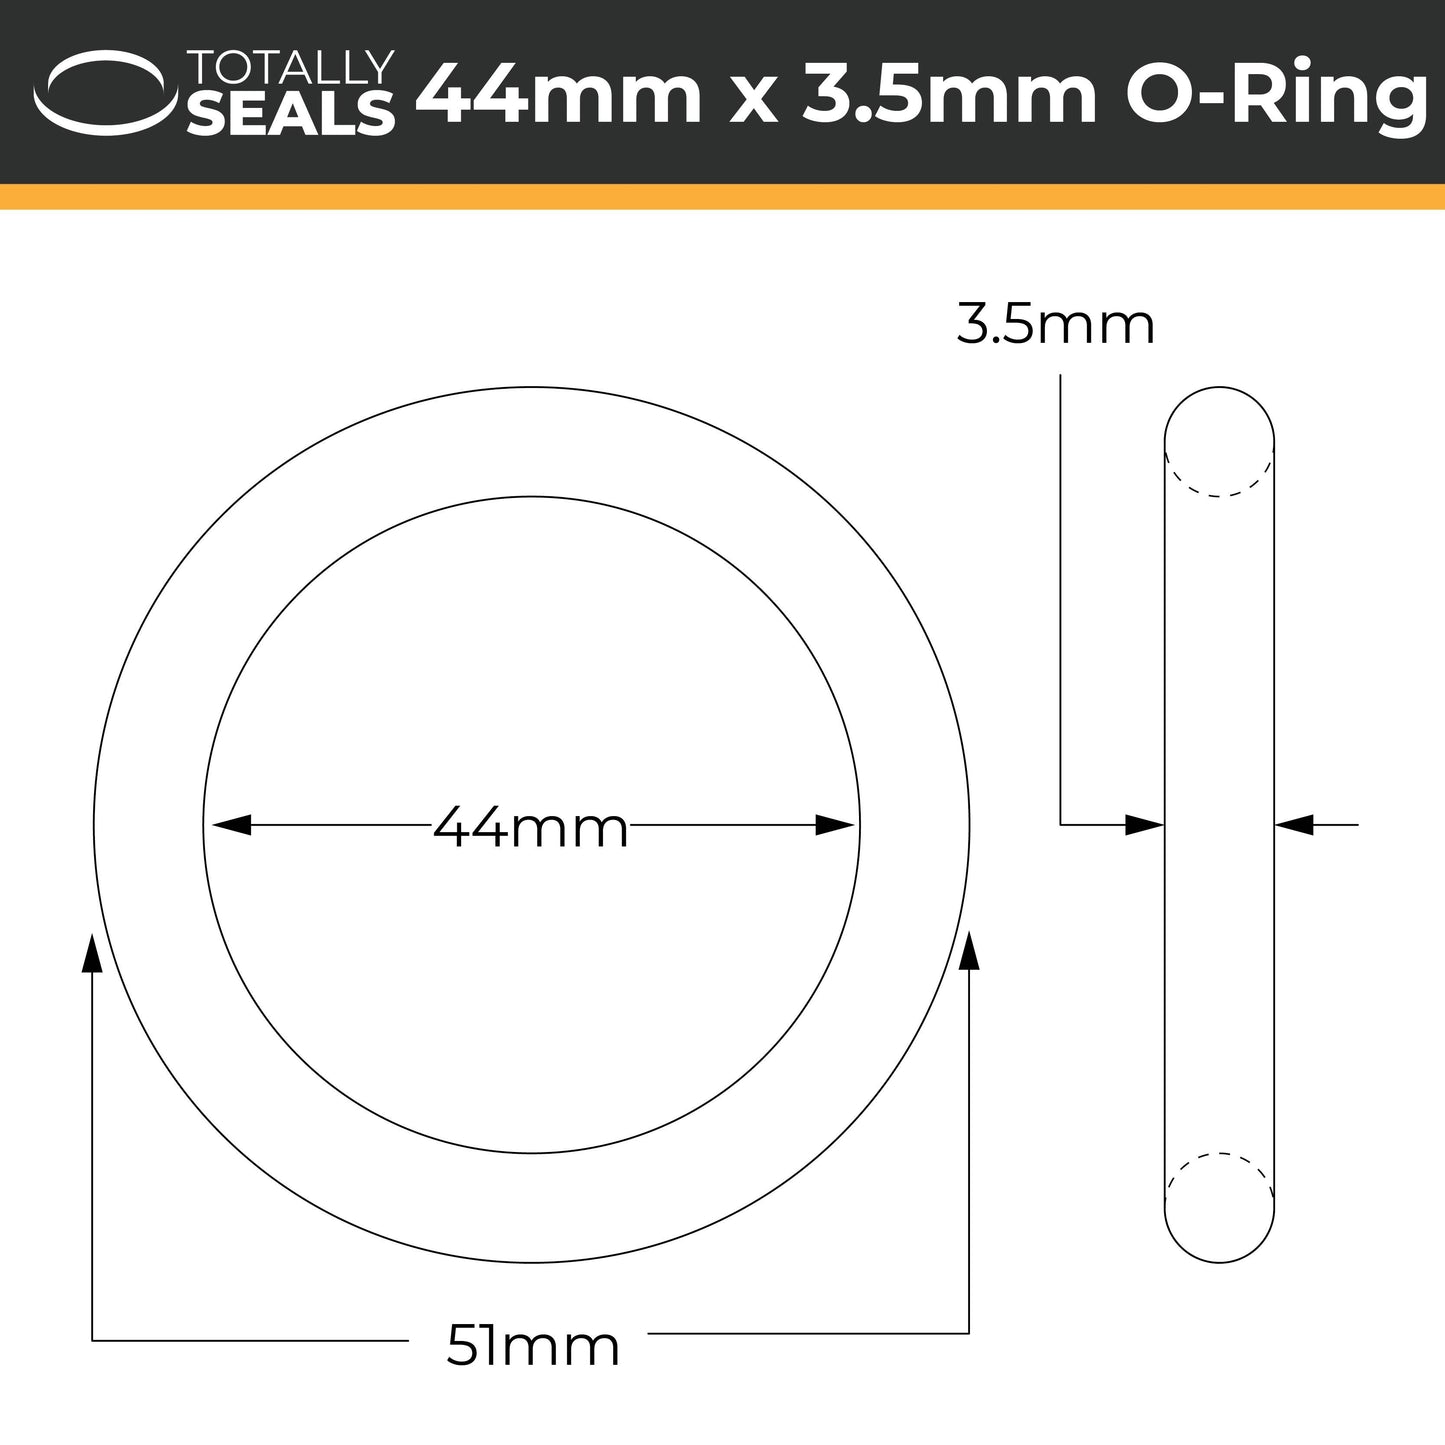 44mm x 3.5mm (51mm OD) Nitrile O-Rings - Totally Seals®